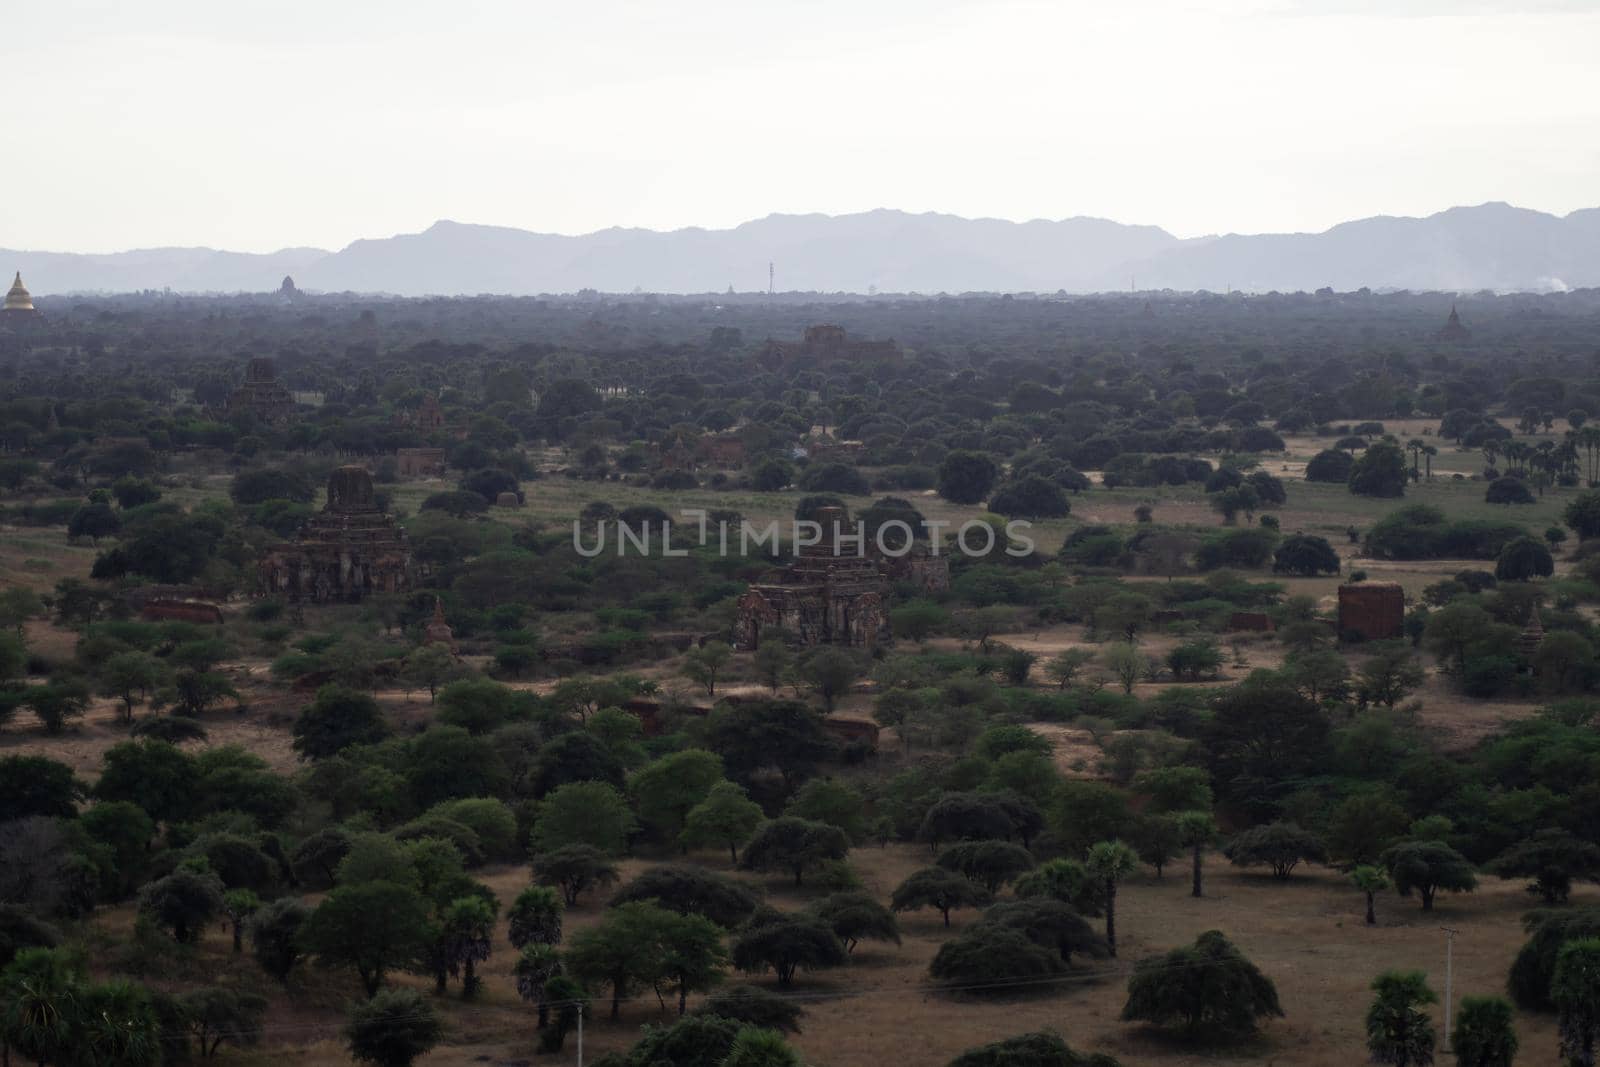 BAGAN, NYAUNG-U, MYANMAR - 3 JANUARY 2020: Looking out over the vast plains of Bagan with its historical temples and fields from the tall Nan Myint viewing tower